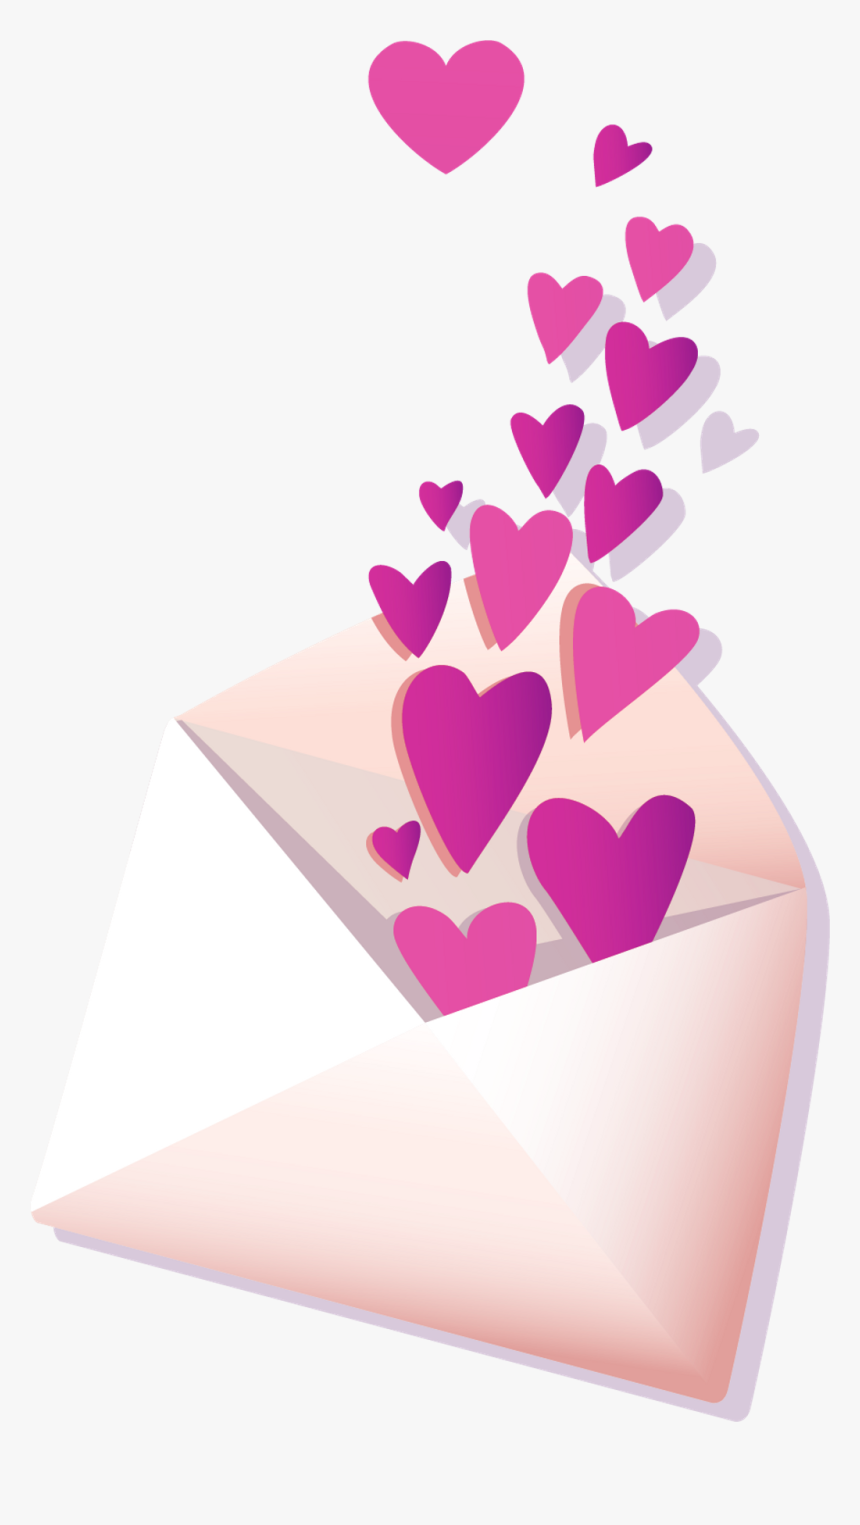 Send A Love Letter To Someone 💗 - Hearts Coming Out Of Envelope, HD Png Download, Free Download